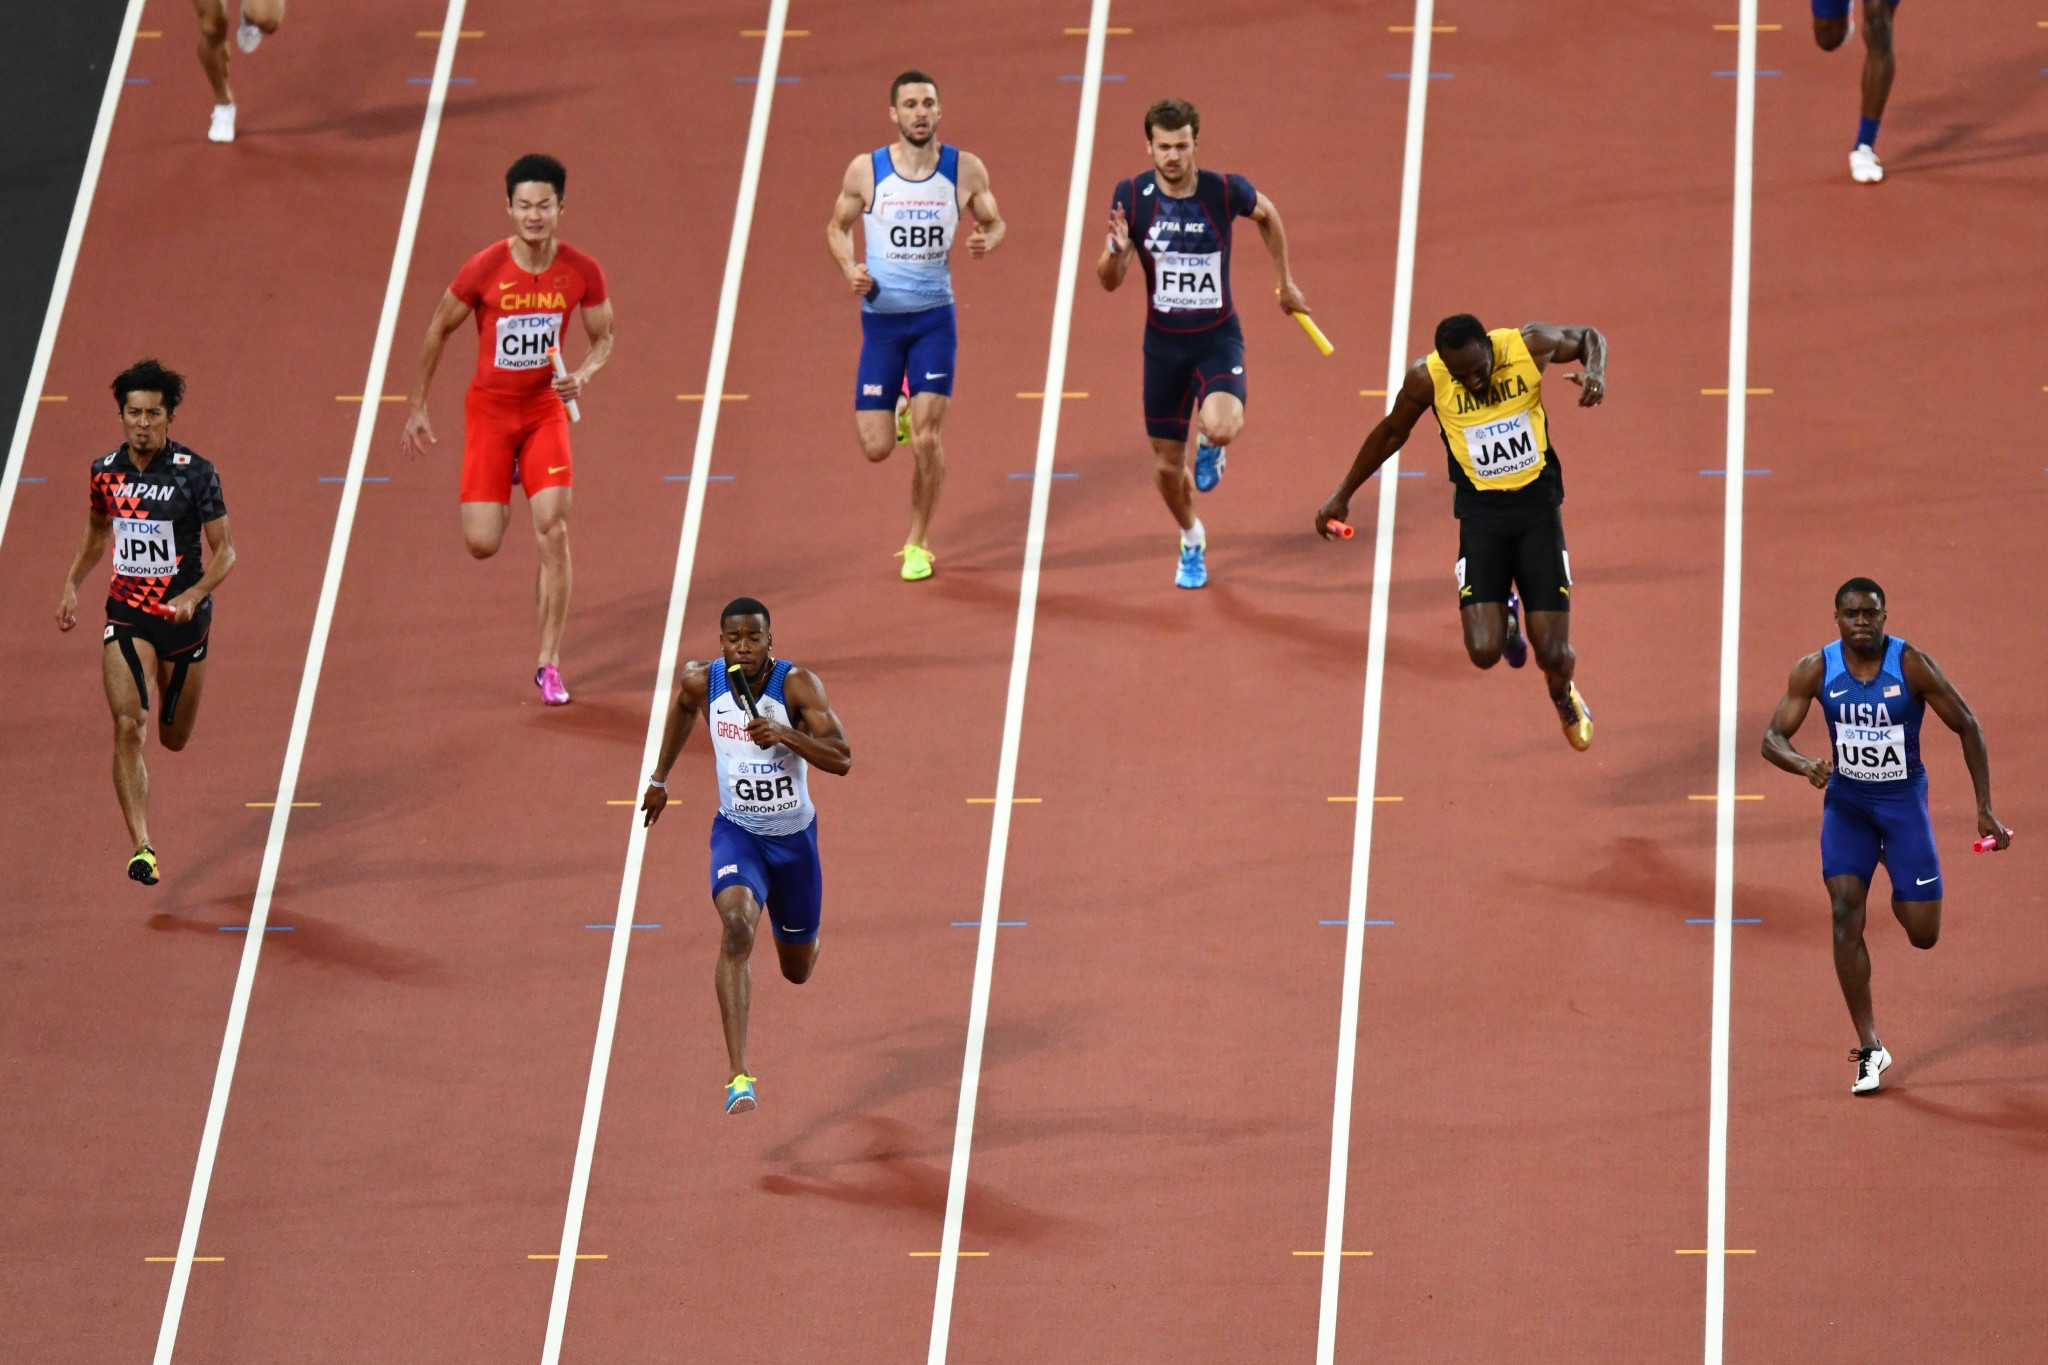 Usain Bolt's farewell race ended in disaster as he pulled up injured in the home straight of the 4x100m relay ©Getty Images